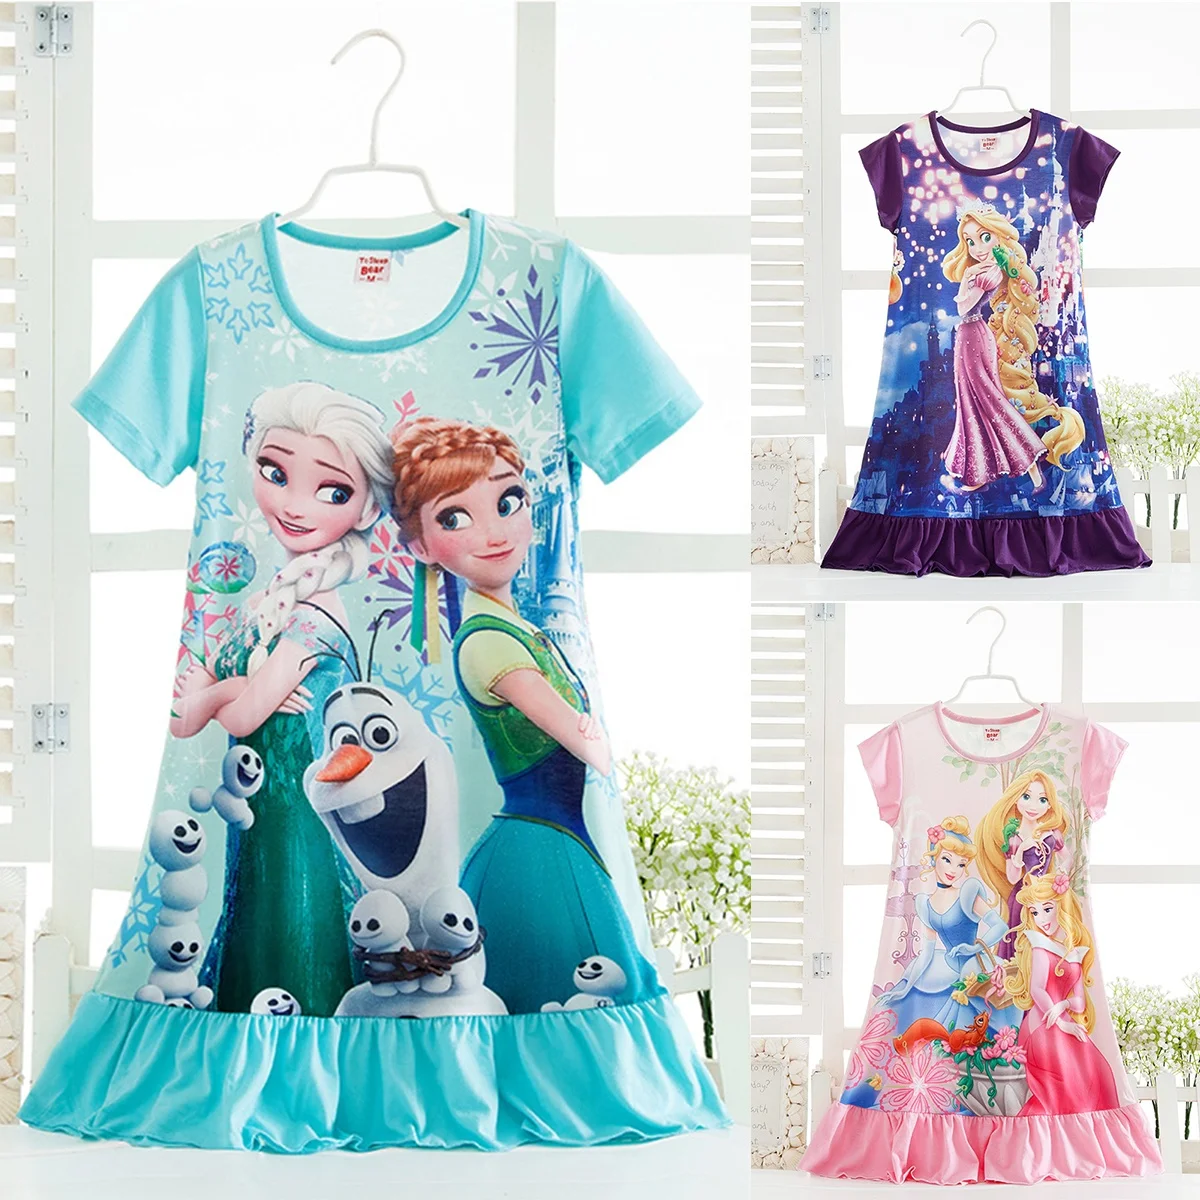 

Fashion Baby Girls Dresses Cotton Snow Queen Elsa Anna Nightdress Ruffle Short Sleeve Princess Dress Kids Pajamas Nightgowns, As the picture